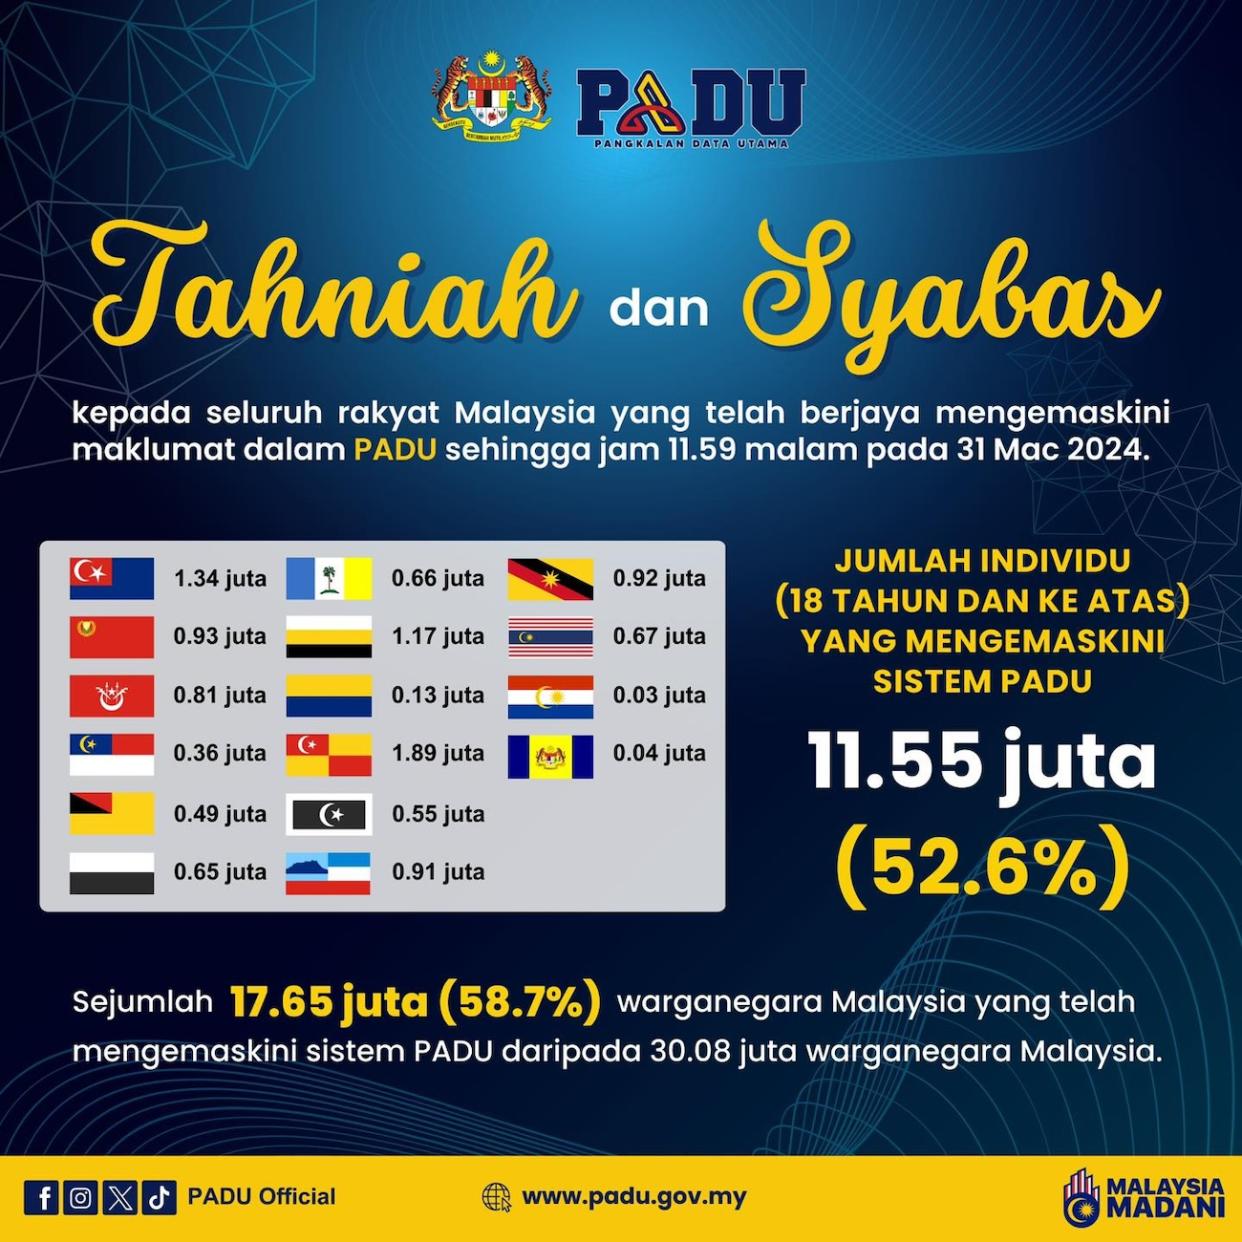 In a Facebook post update by Padu on 1st April, 11.55 million Malaysians have successfully updated their information.